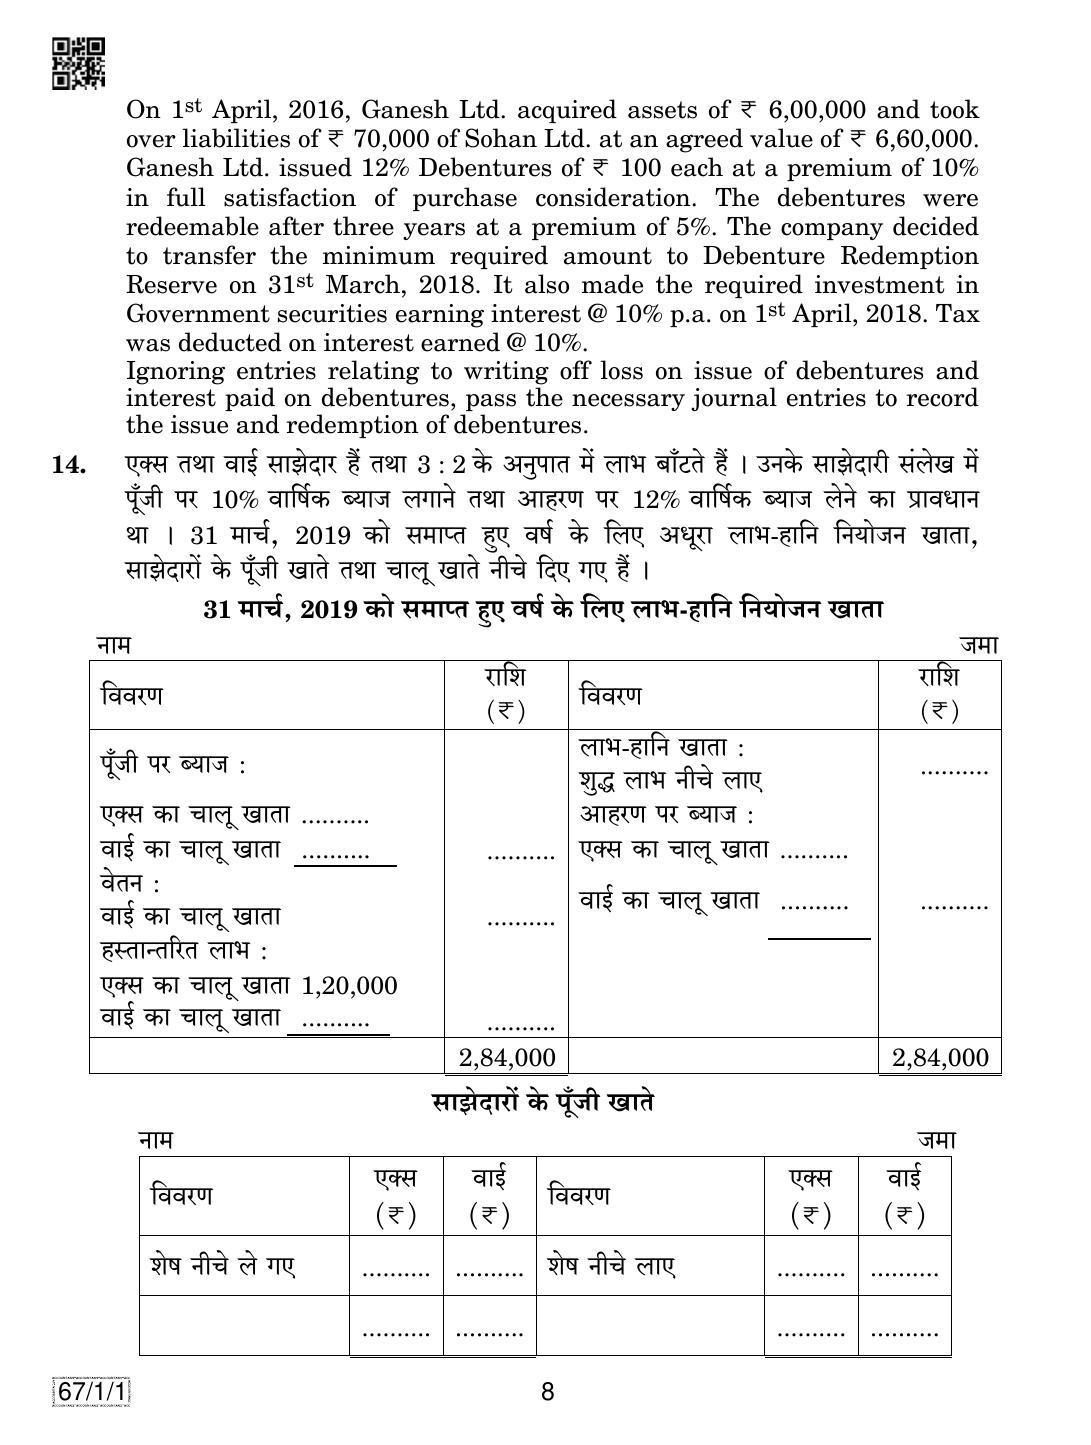 CBSE Class 12 67-1-1 ACCOUNTANCY 2019 Compartment Question Paper - Page 8